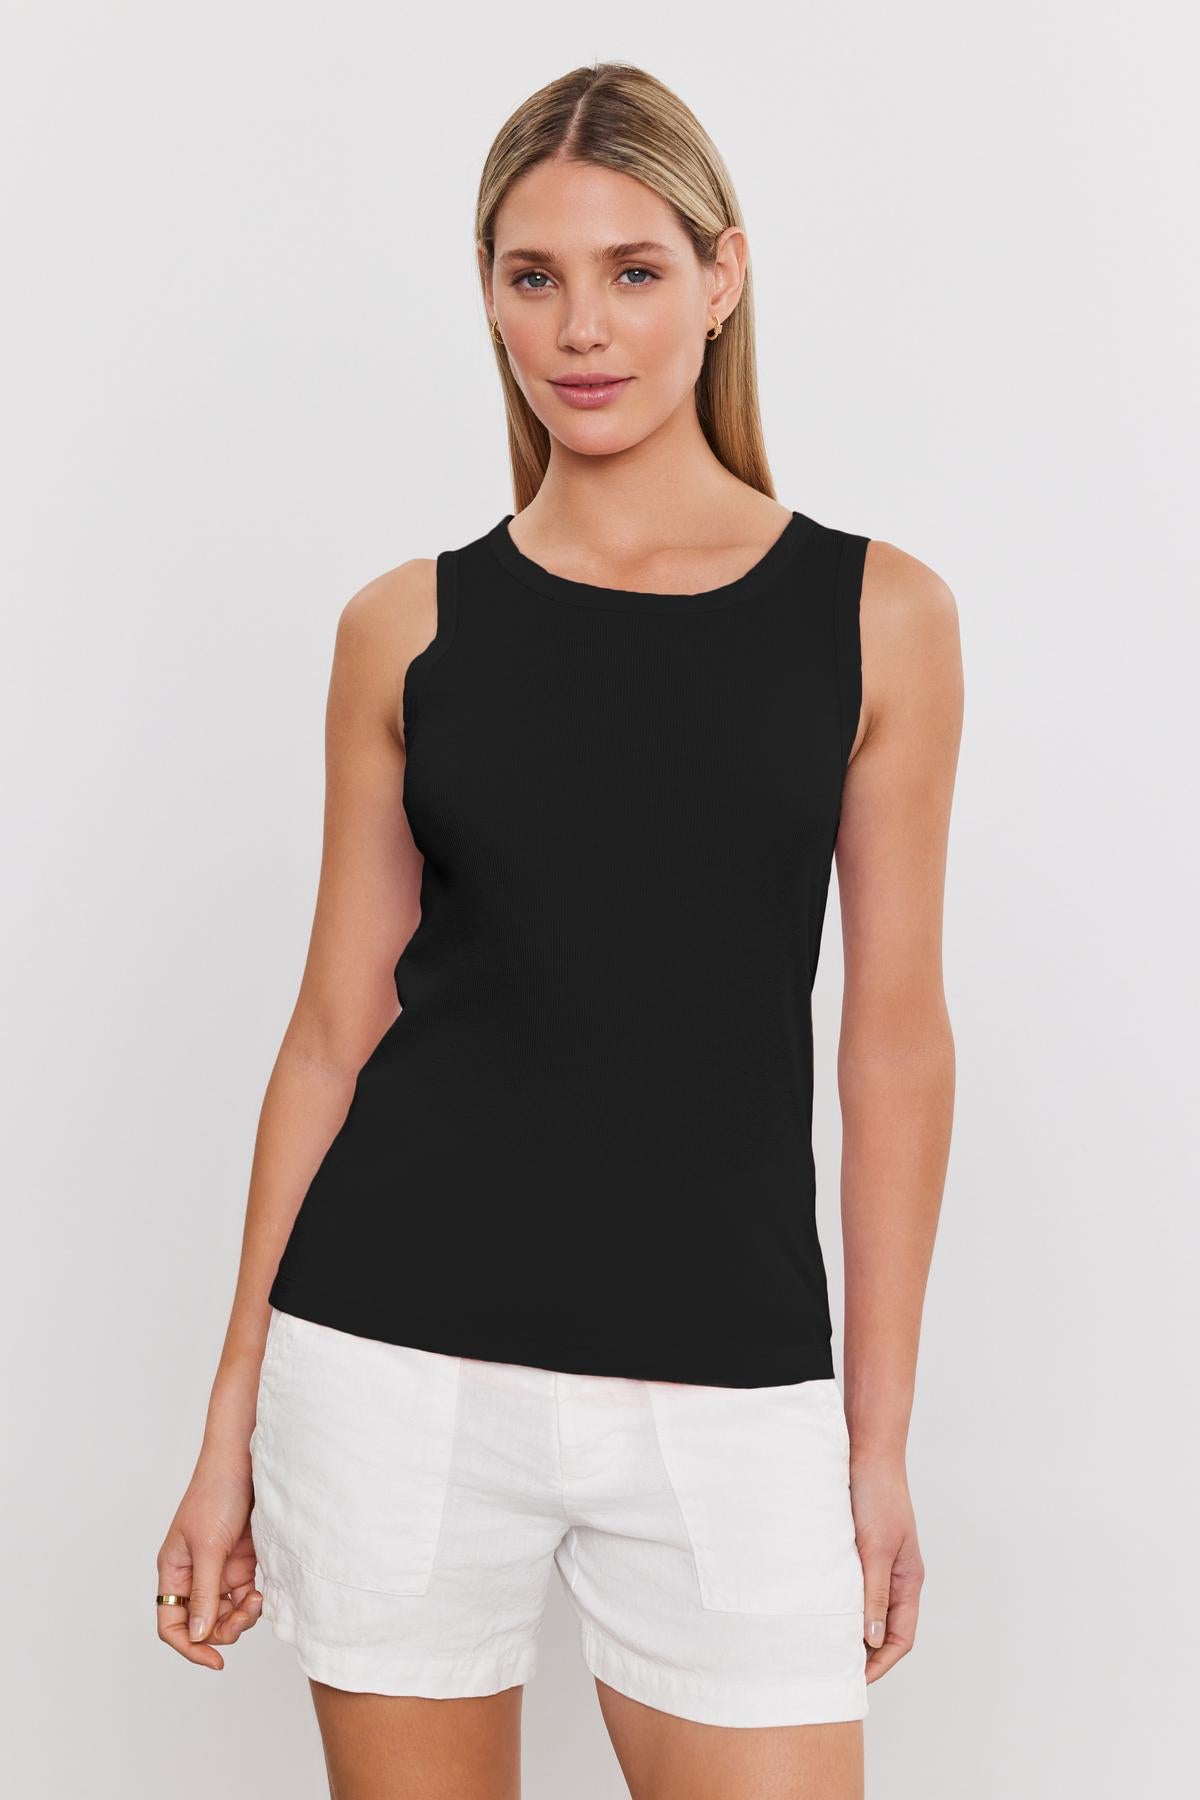   A woman with straight blonde hair, wearing a black sleeveless MAXIE RIBBED TANK TOP by Velvet by Graham & Spencer and white shorts, stands against a plain white background. 